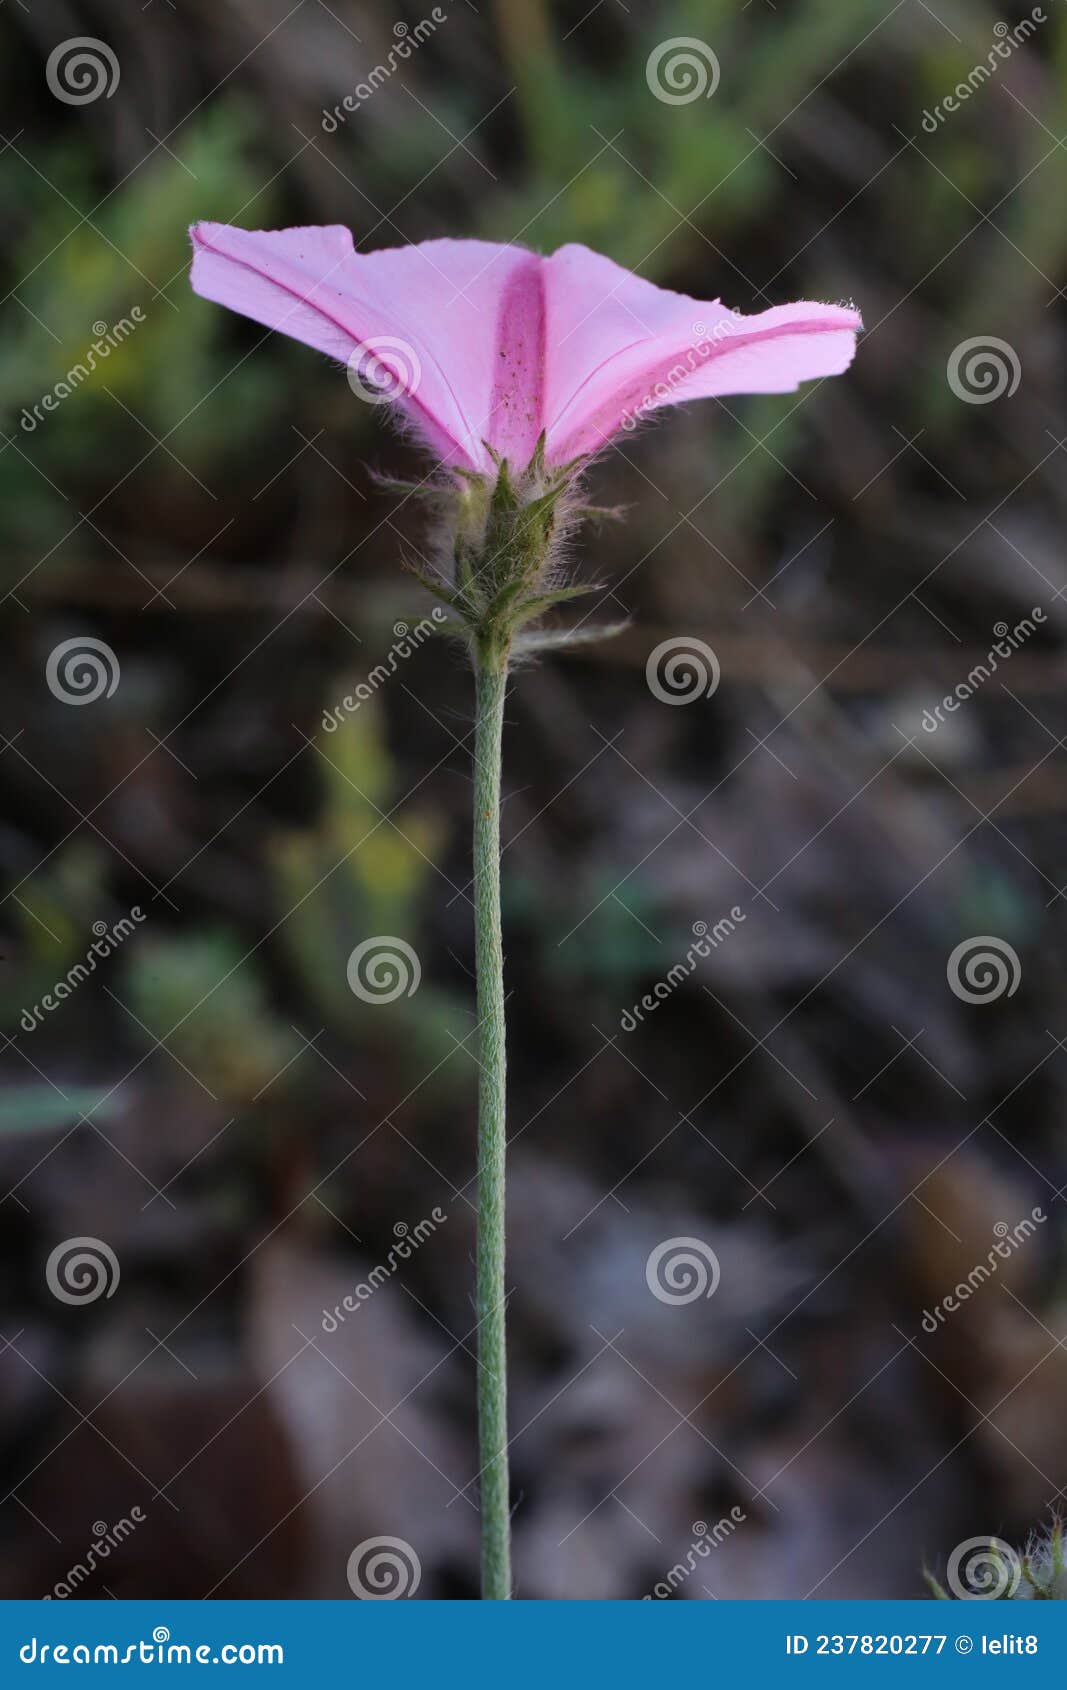 convolvulus cantabrica - wild plant shot in the spring